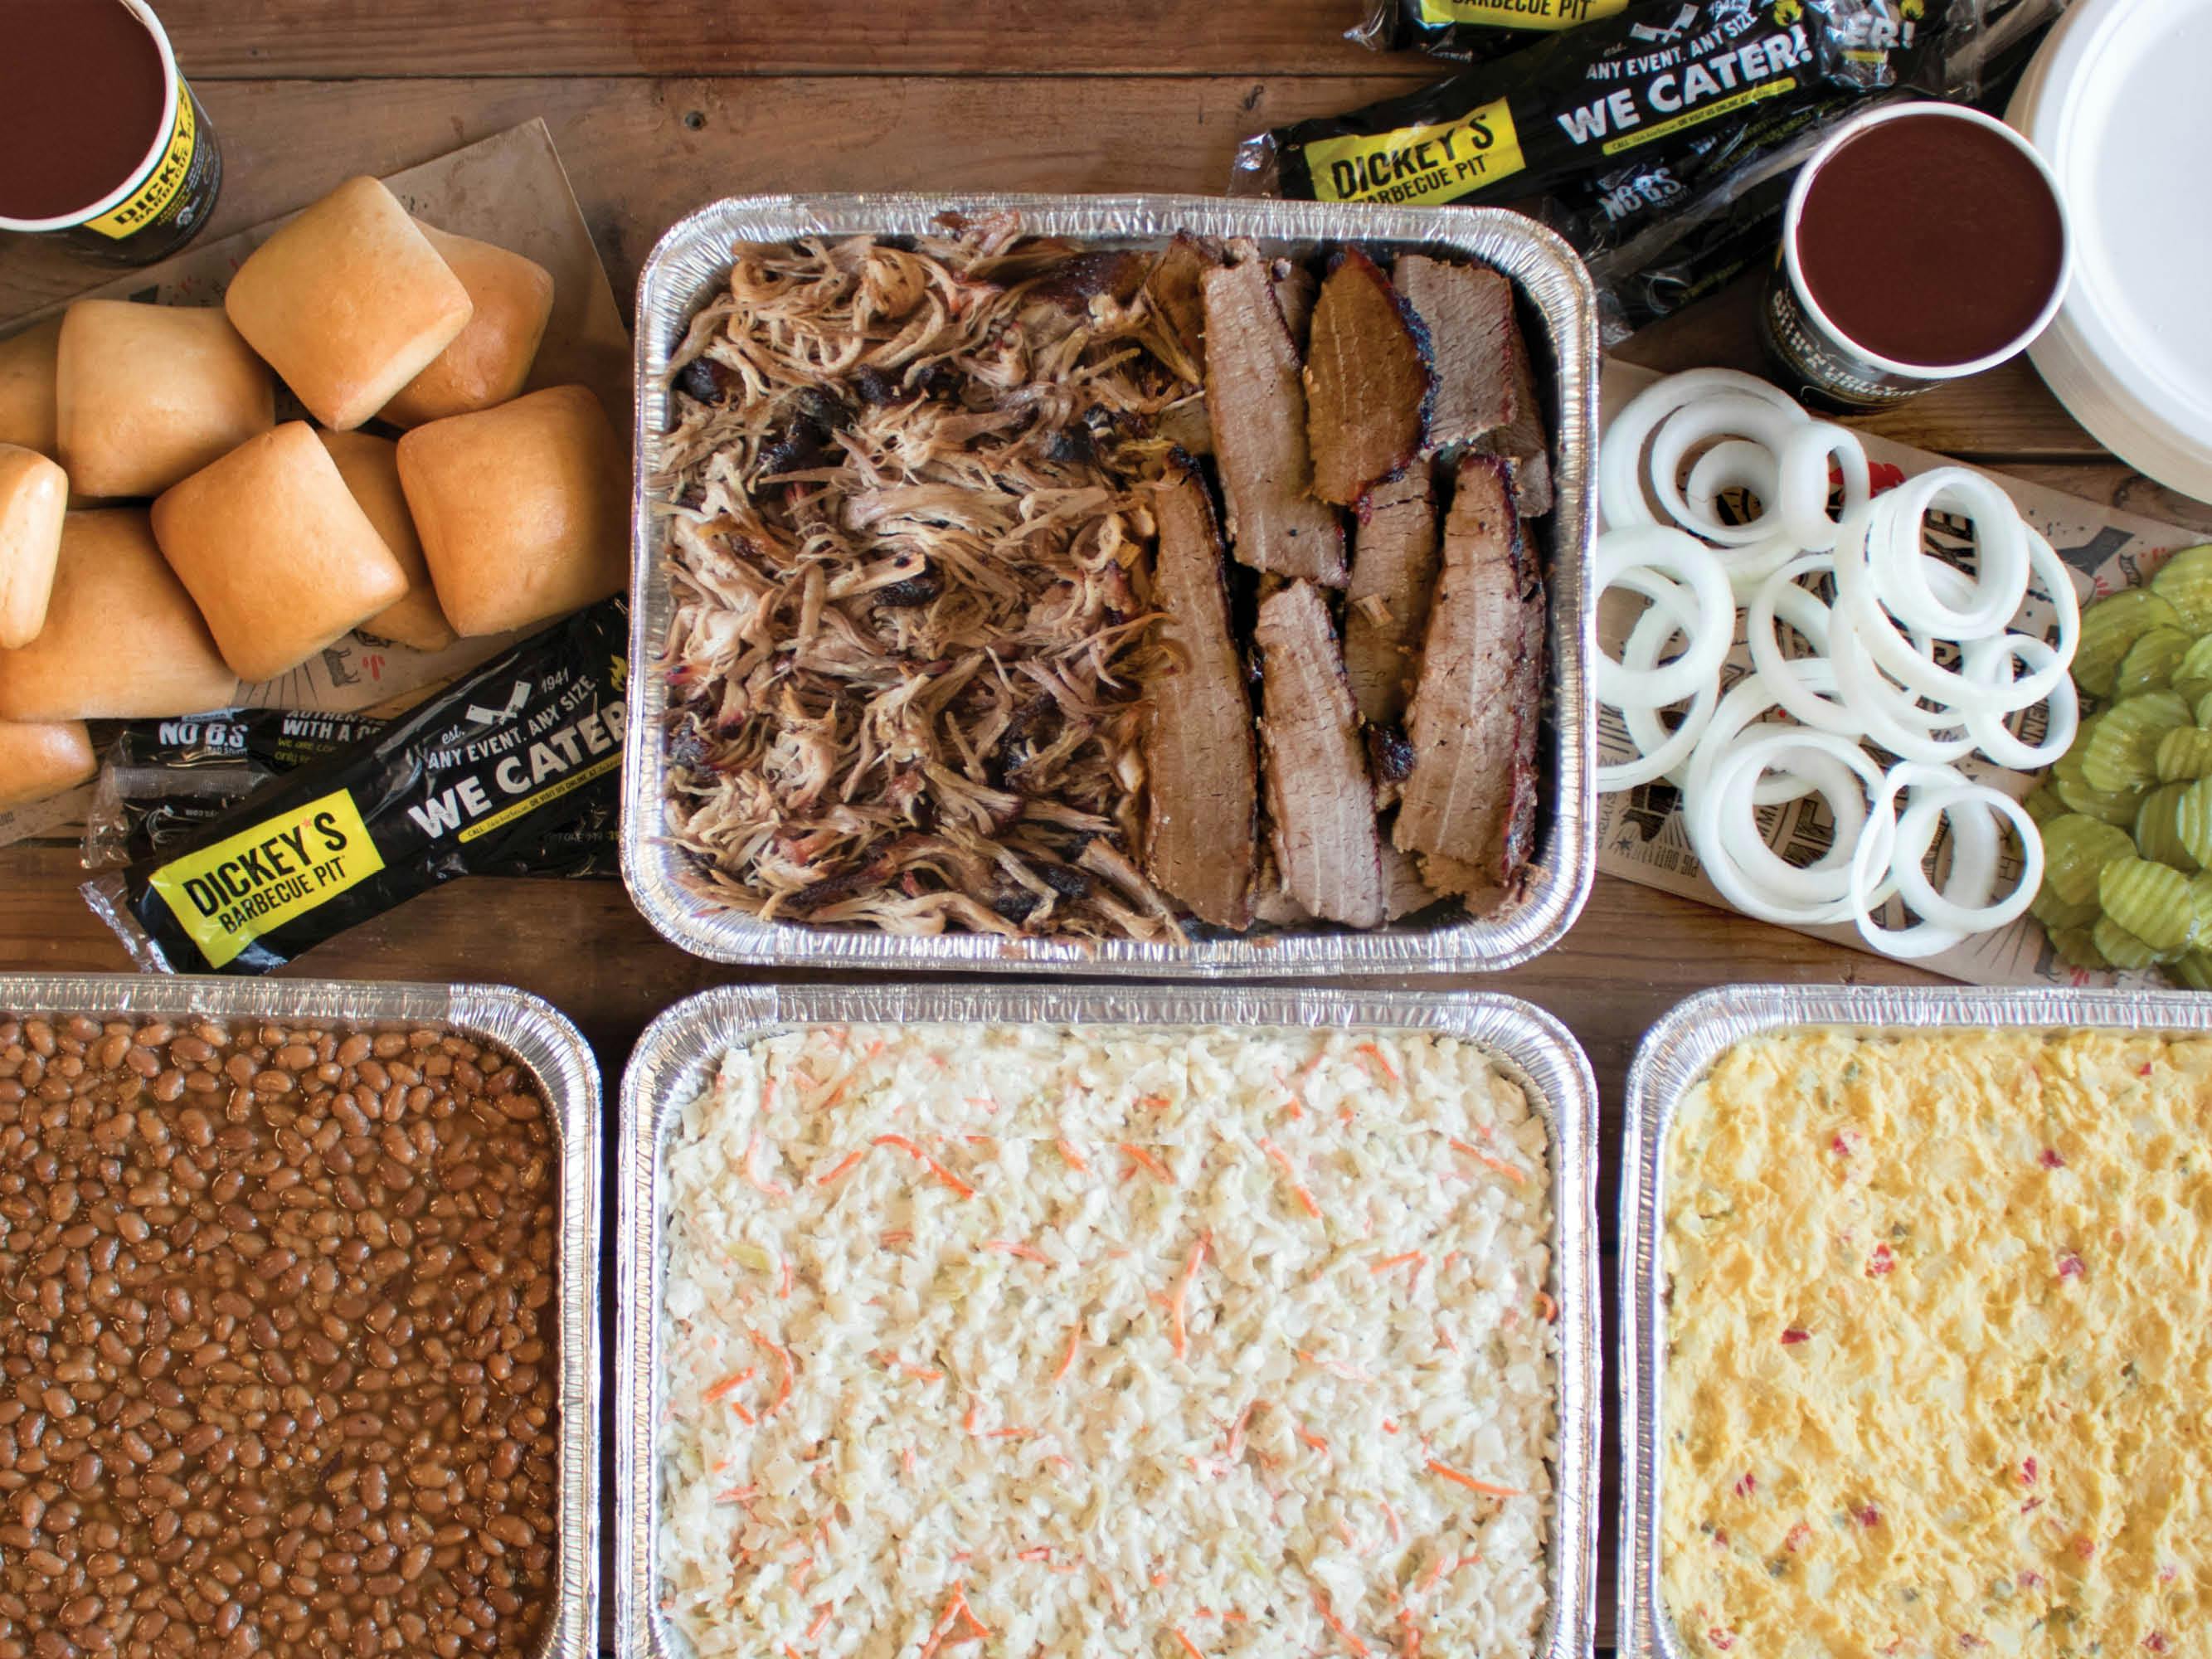 Living a Full and Fit Life: Football Season is Here and Dickey's Barbecue Pit has Meal Time Covered with their New Tailgate Party Pack!